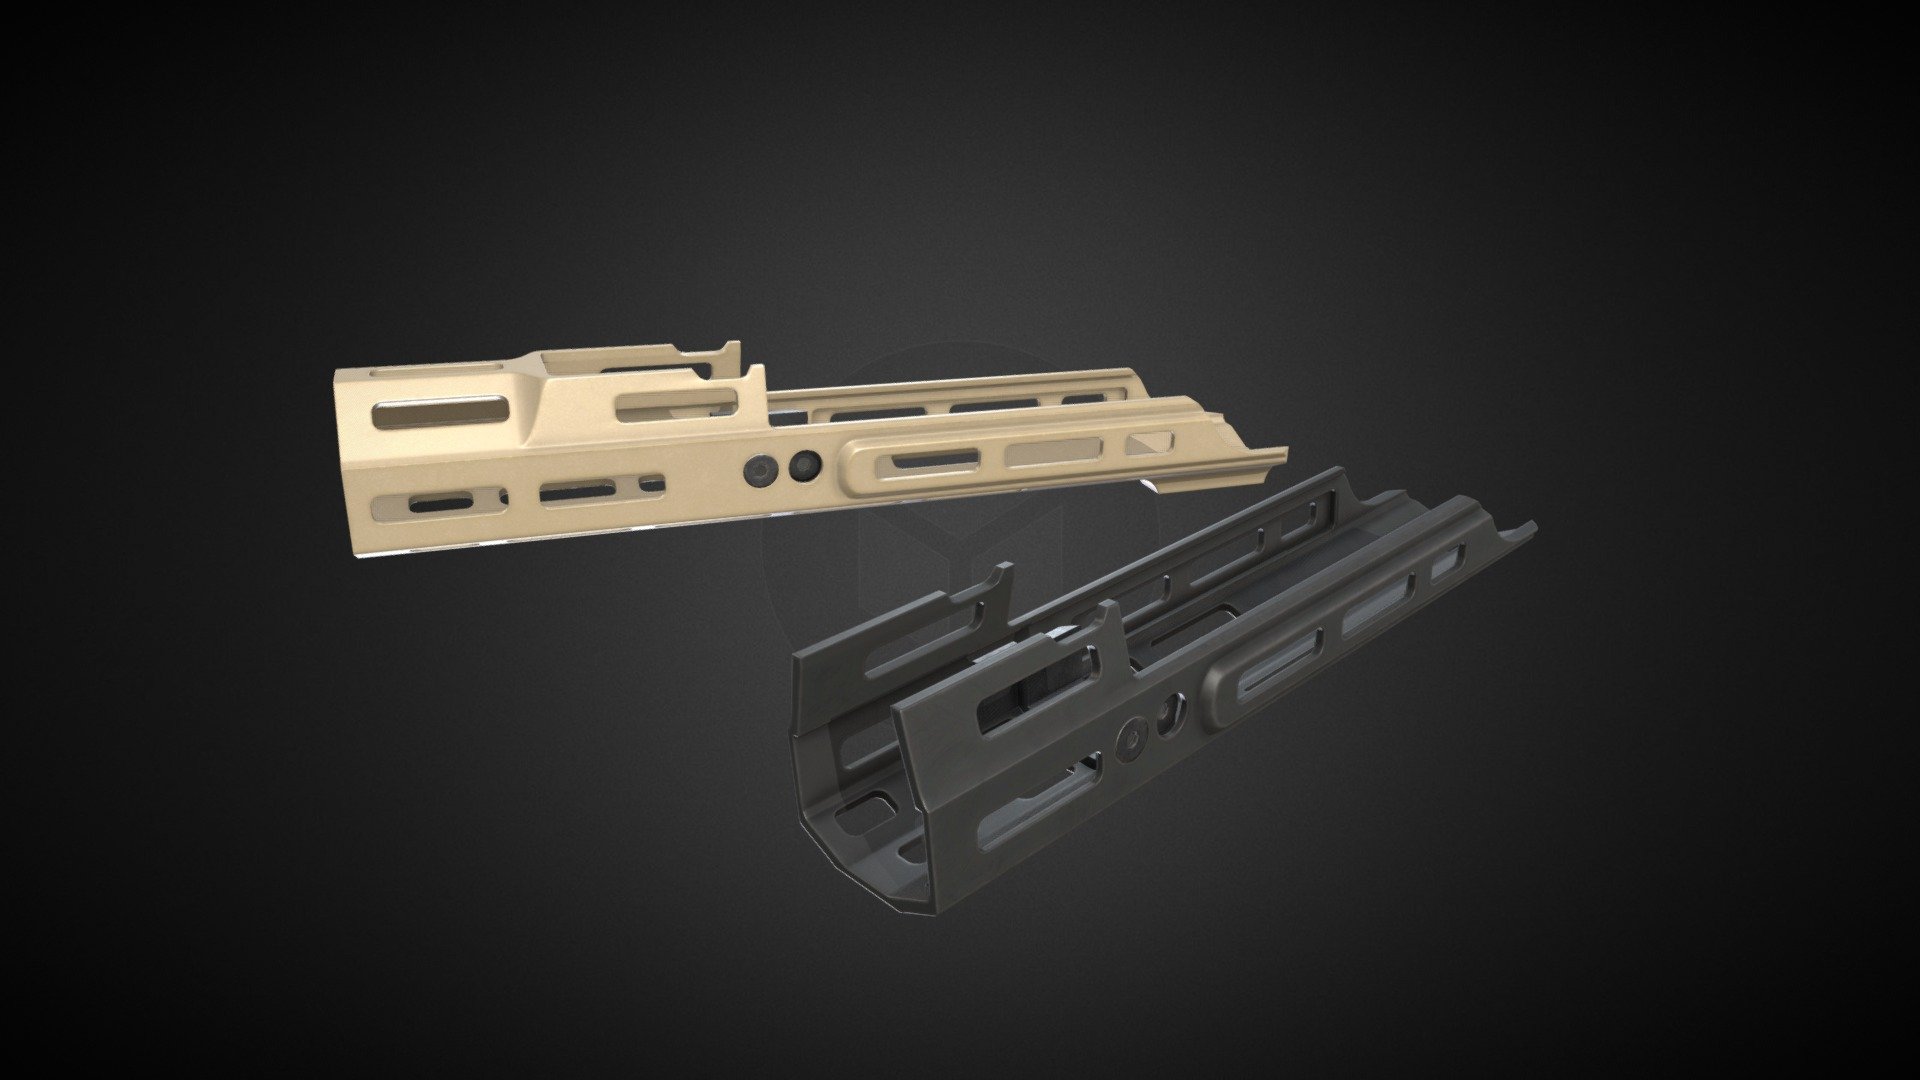 Handguard for Mufasa&hellip; I mean Scar Rifle.

Two sizes, 2.2 and 4.25.  

Models have separate PBR Materials in 4K. Black and FDE colors are included.

Verts: 2.7K / 3.1K

Tris: 5.5K / 6.4K  

Made in Blender.  

PS. Model is not made to be 3D printed, do not ask for conversion/scale for print 3d model